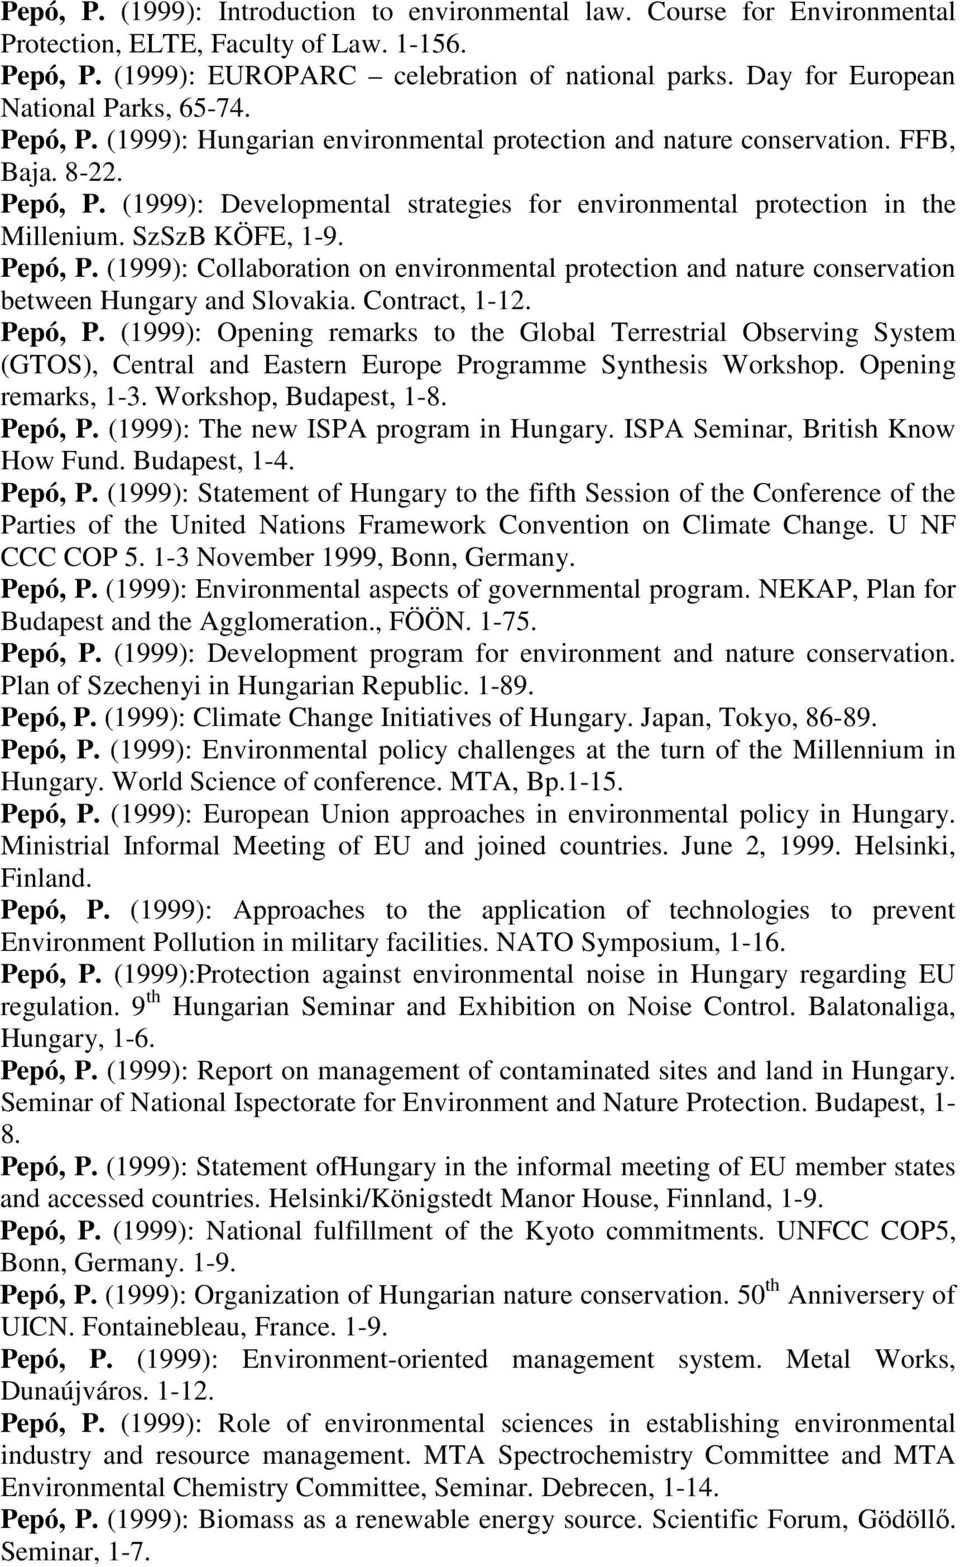 SzSzB KÖFE, 1-9. Pepó, P. (1999): Collaboration on environmental protection and nature conservation between Hungary and Slovakia. Contract, 1-12. Pepó, P. (1999): Opening remarks to the Global Terrestrial Observing System (GTOS), Central and Eastern Europe Programme Synthesis Workshop.